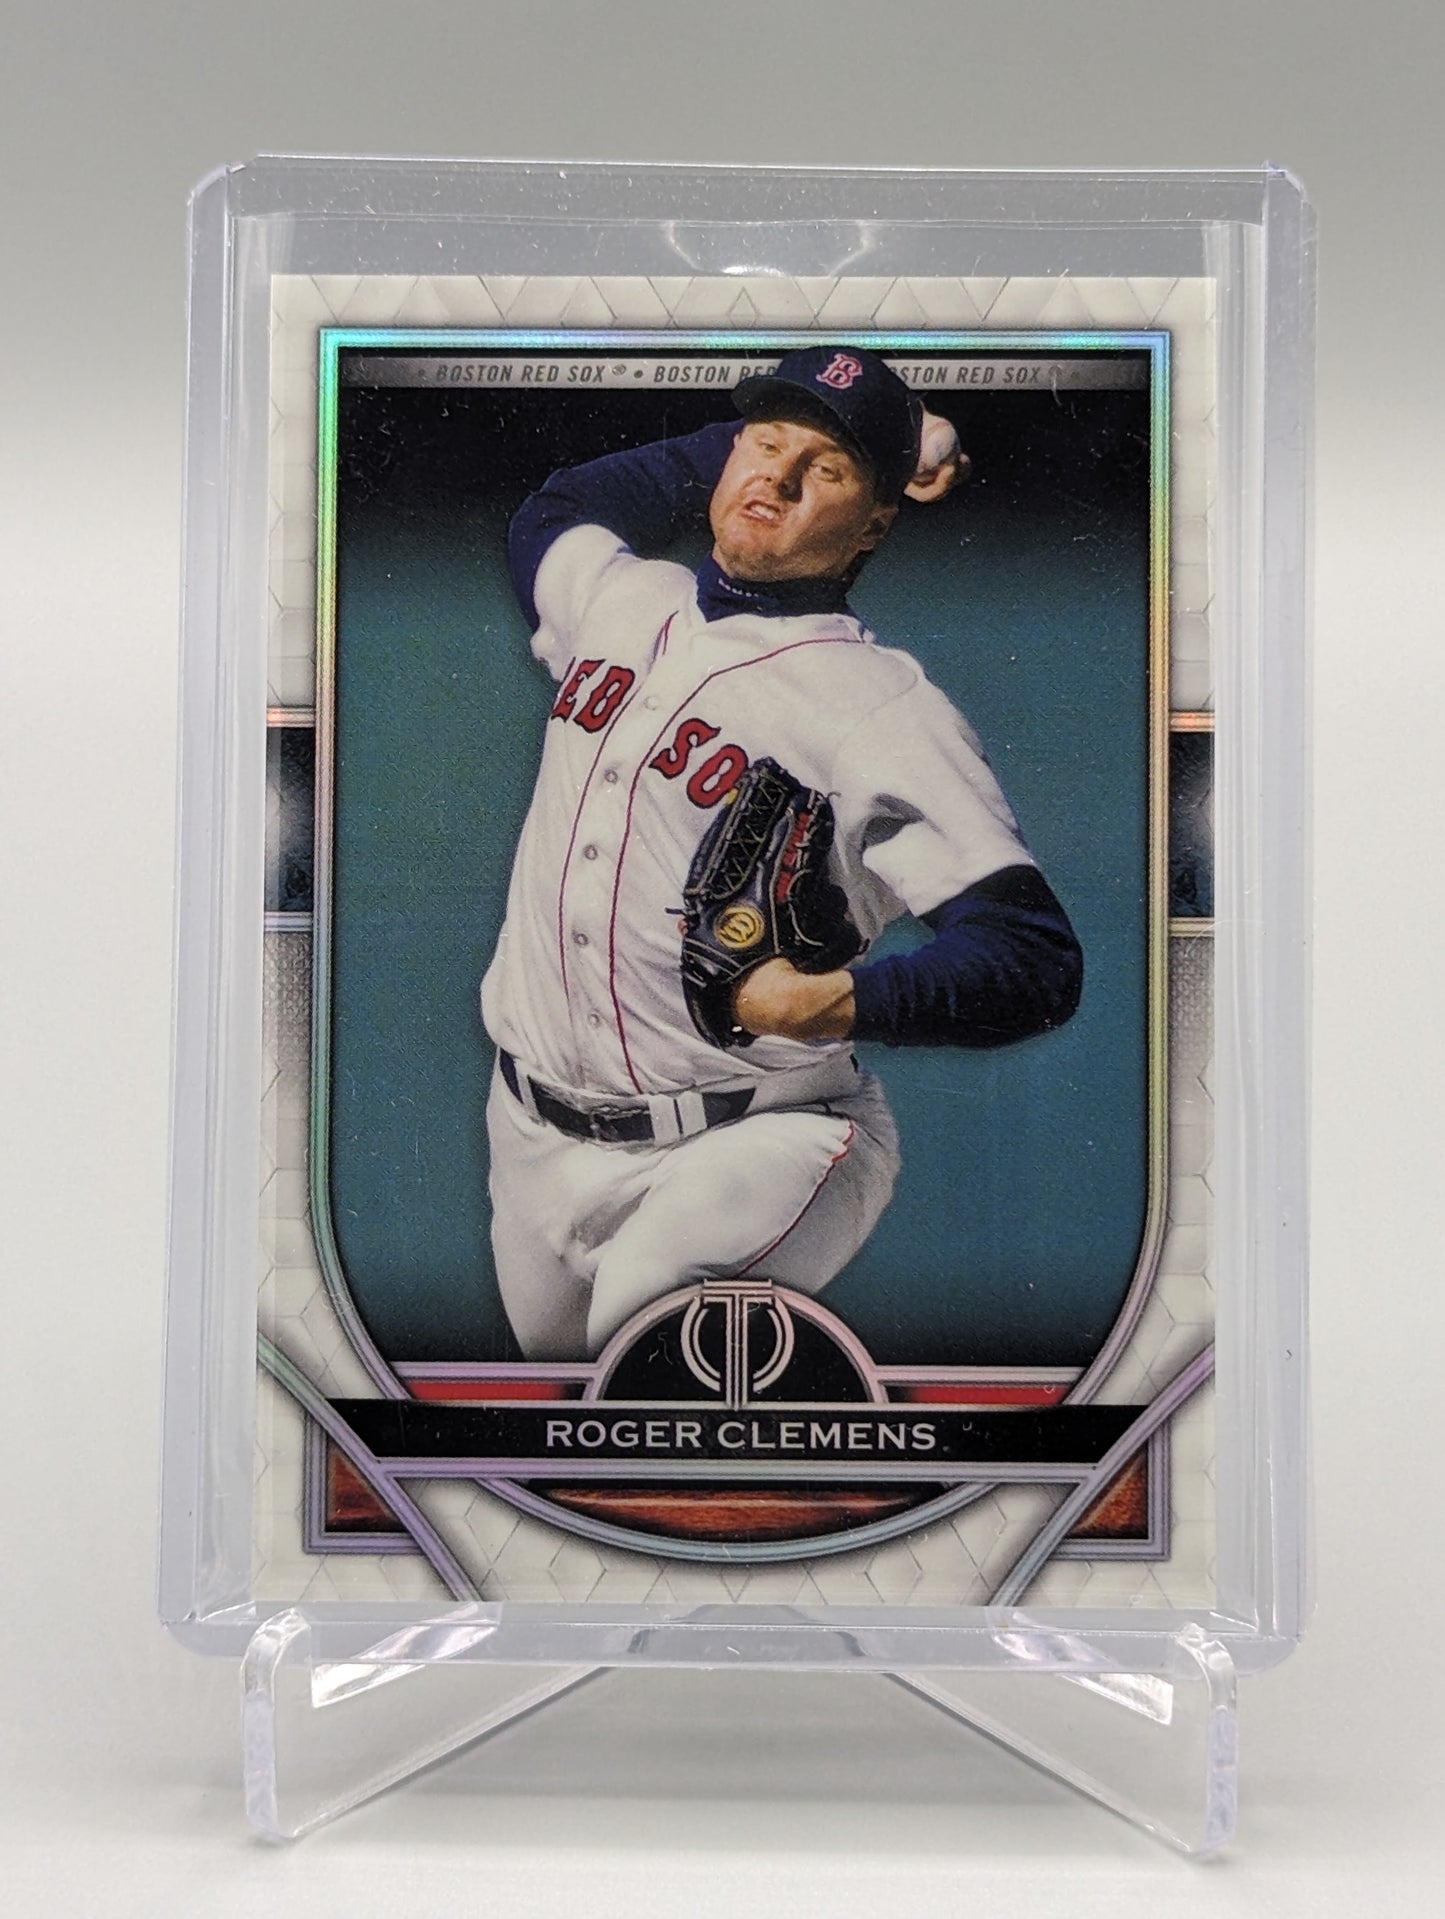 2021 Topps Tribute #5 Roger Clemens Red Sox